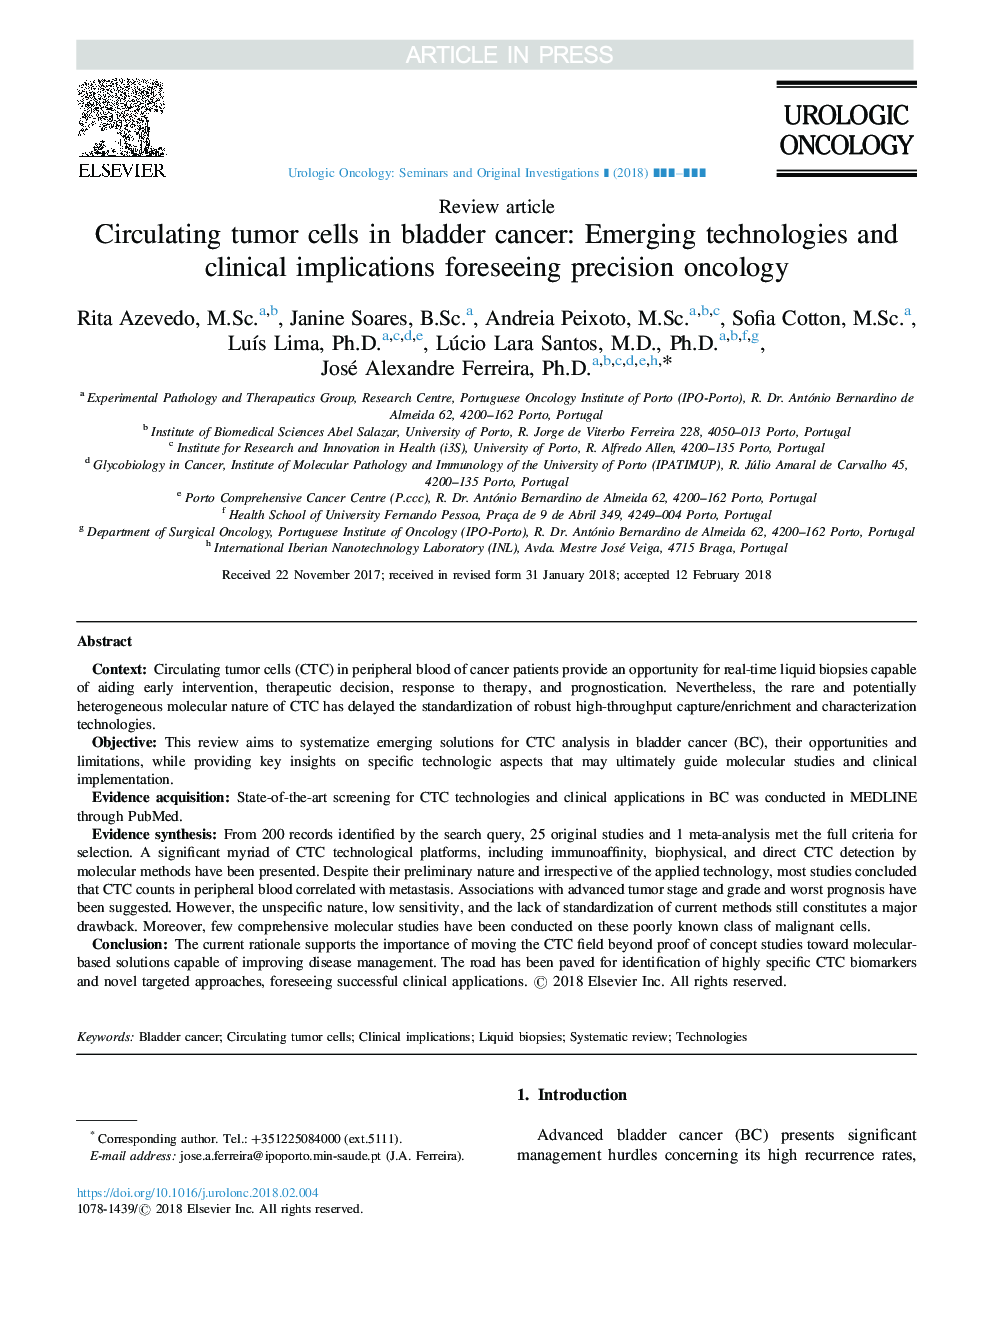 Circulating tumor cells in bladder cancer: Emerging technologies and clinical implications foreseeing precision oncology